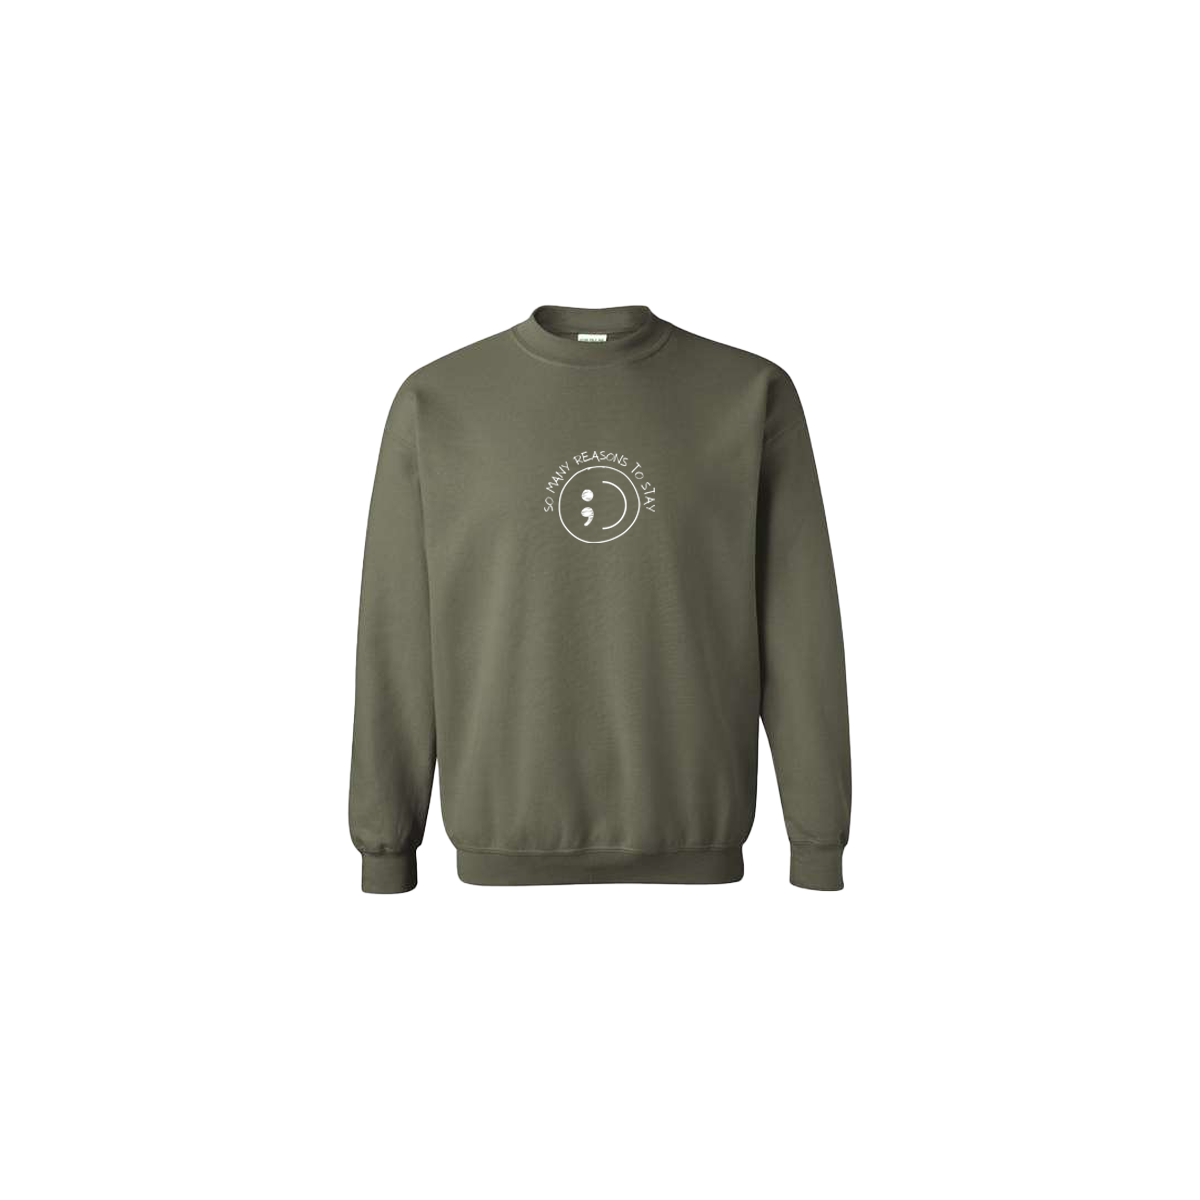 So Many Reasons to Stay Embroidered ArmyGreen Crewneck - Mental Health Awareness Clothing